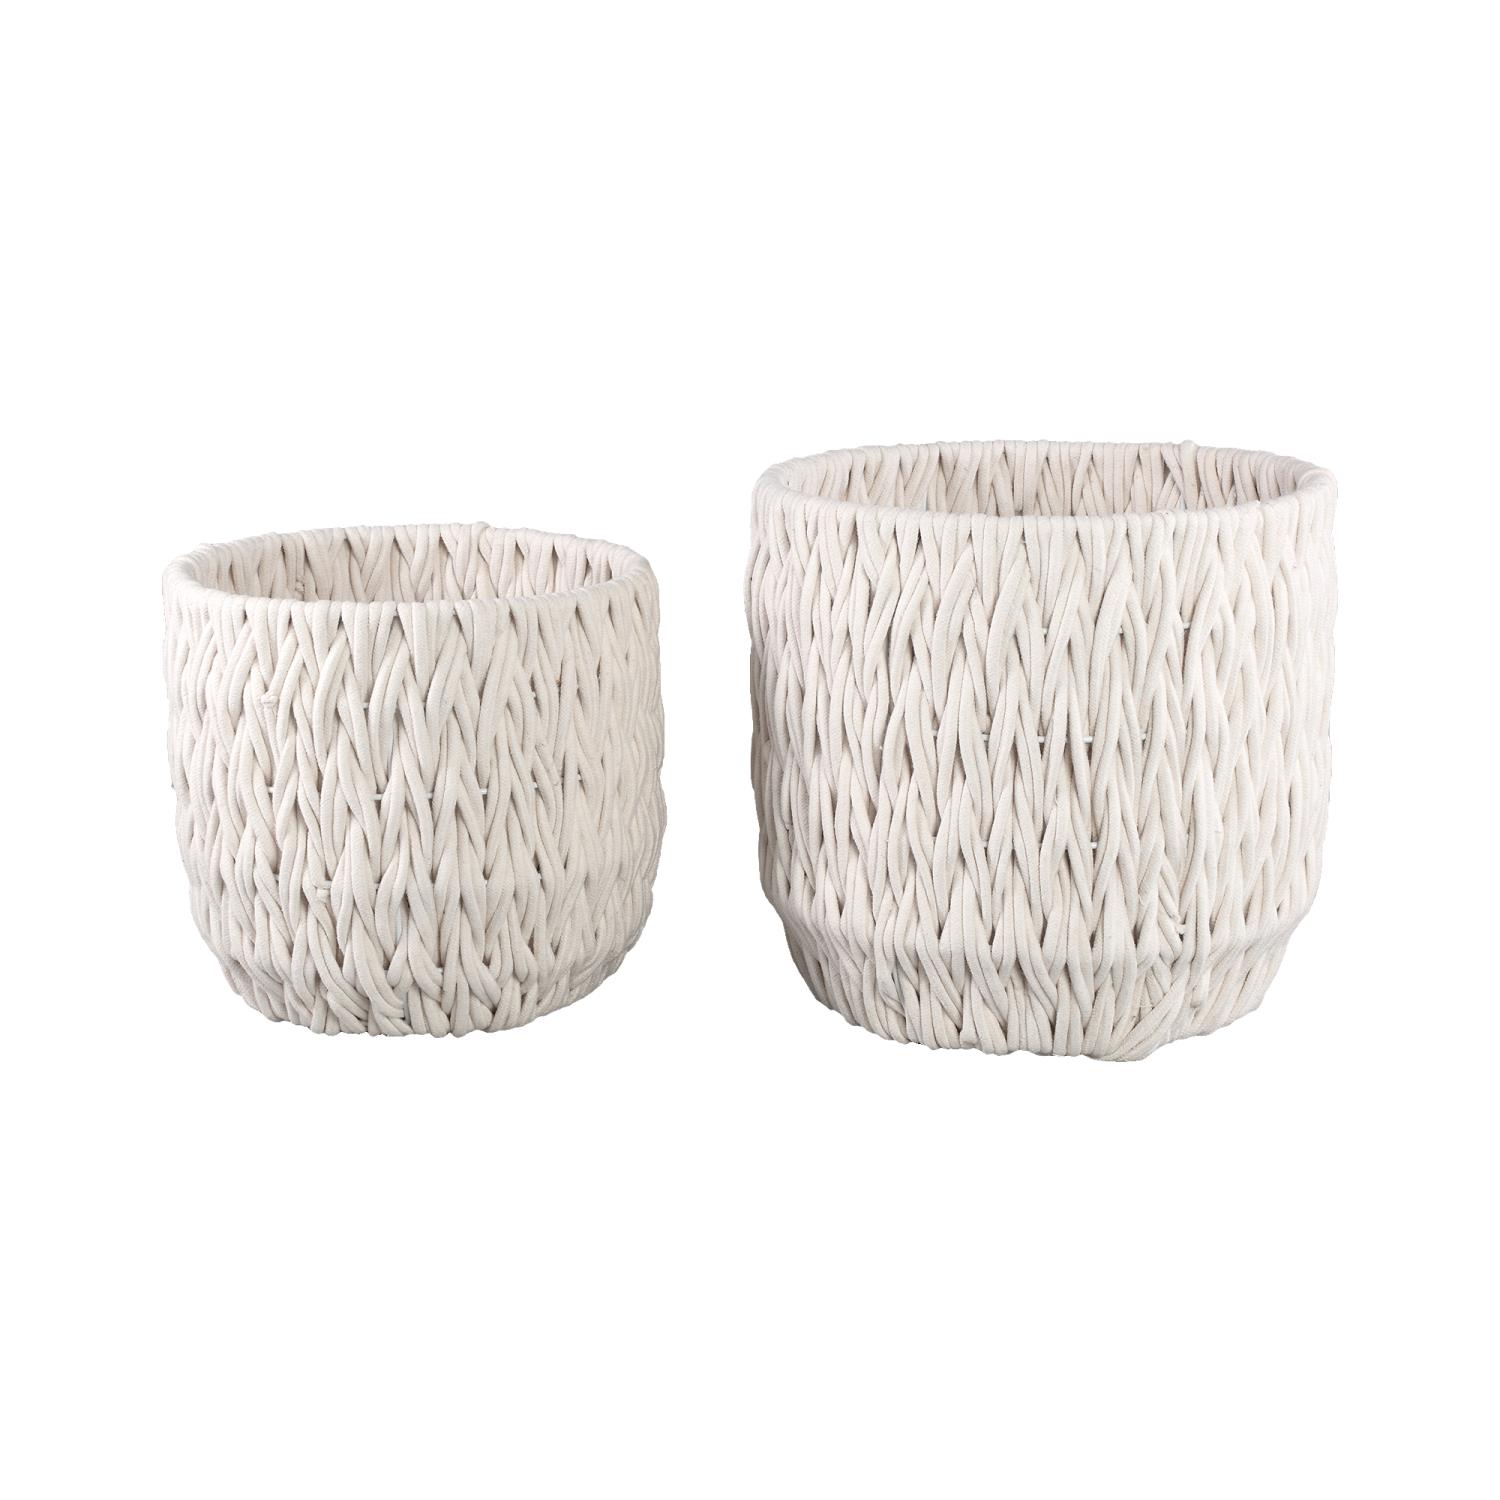 Basket White Linen Rope Low S 720288